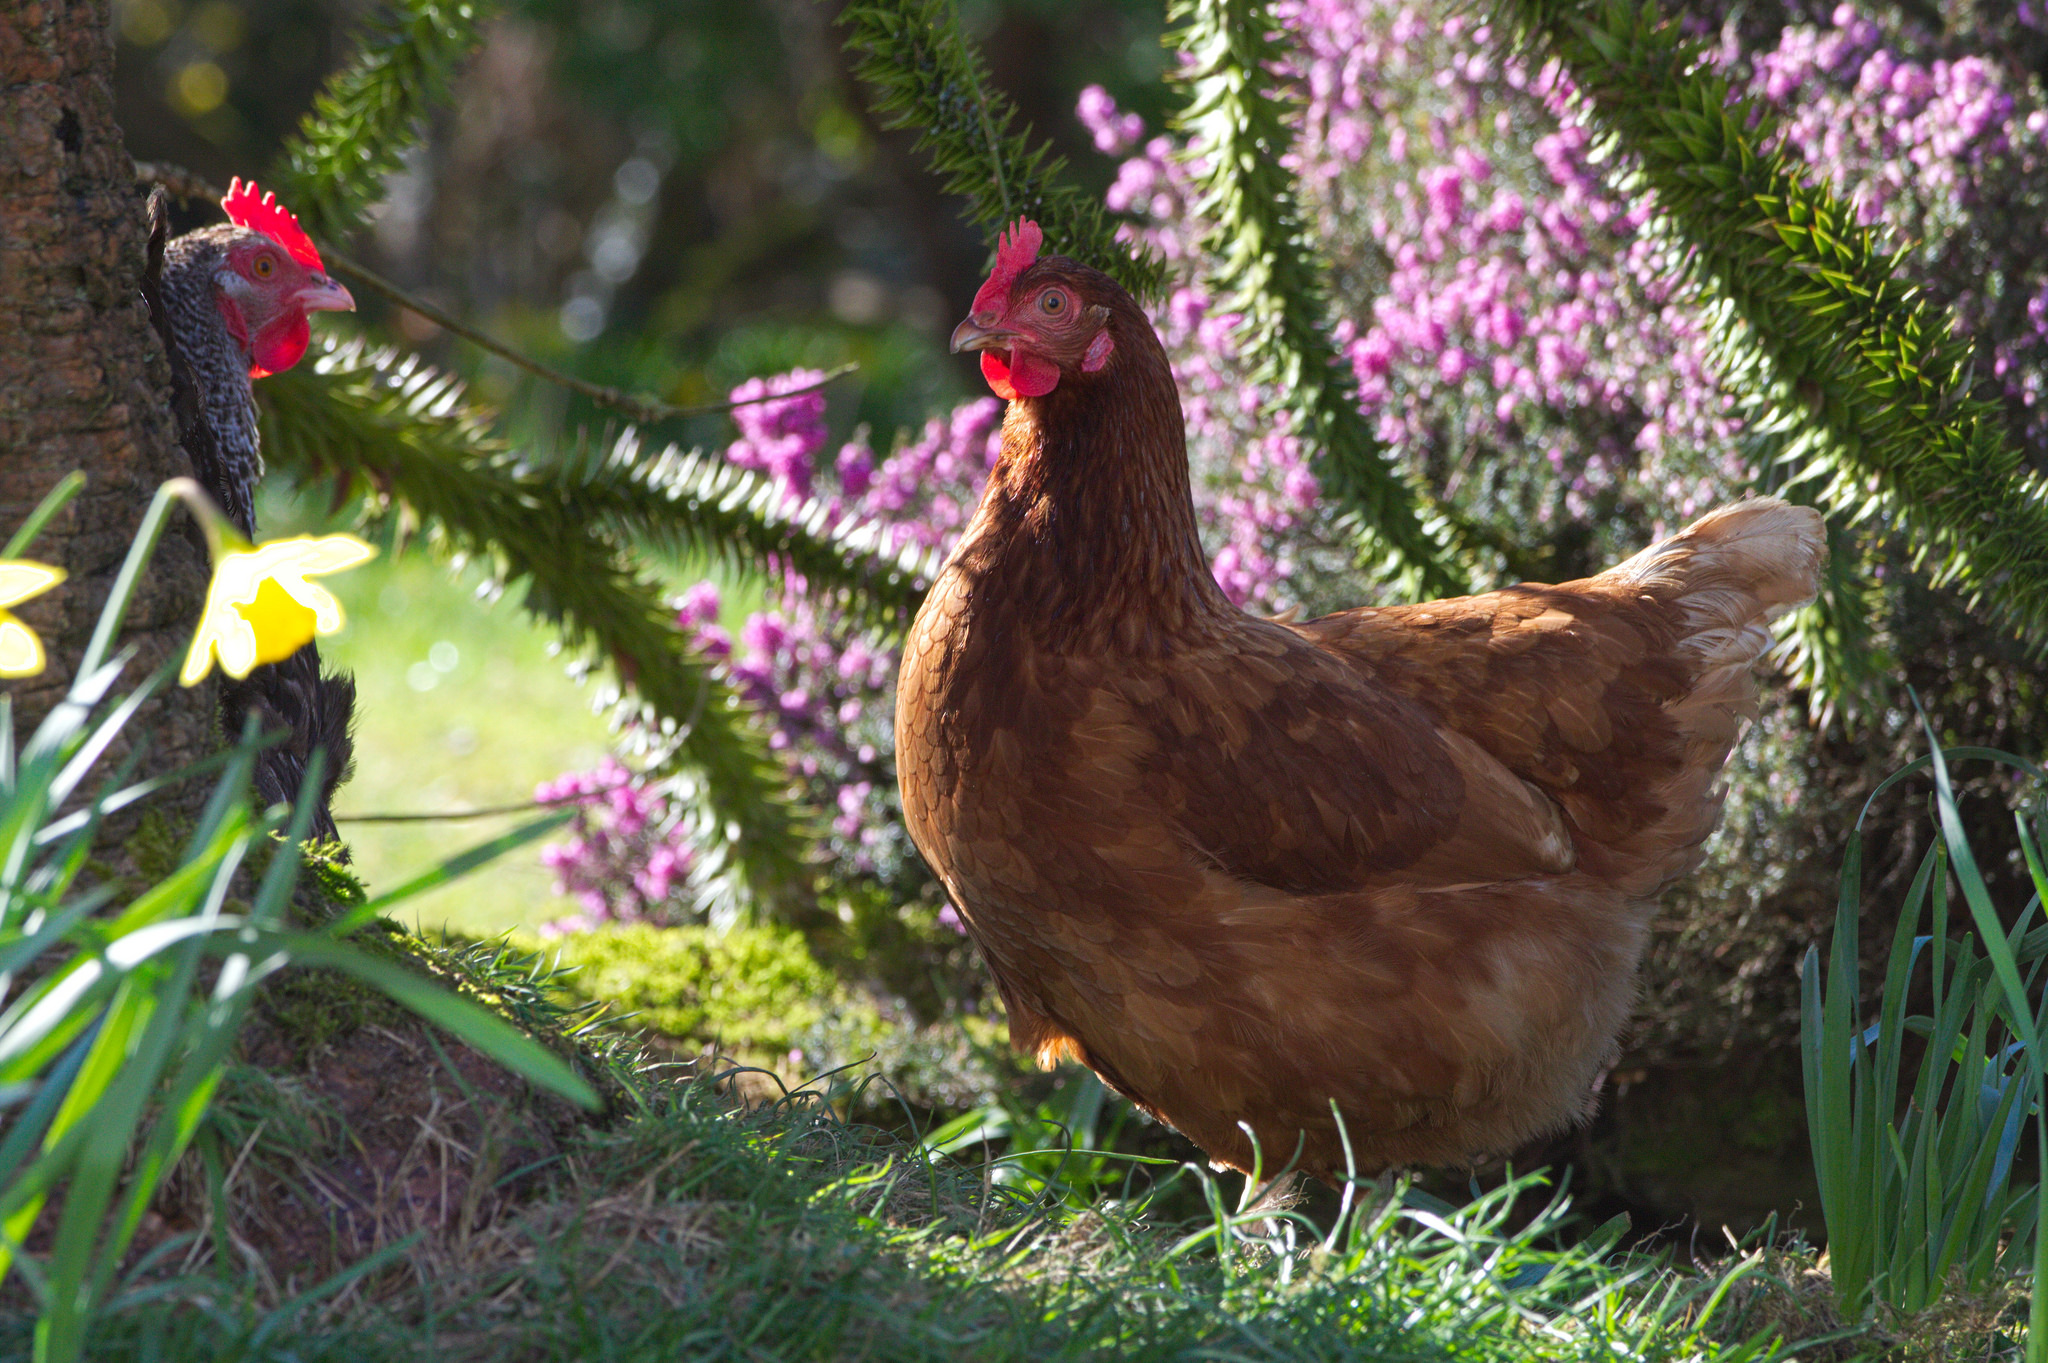 Hens Free in the Garden - photo by Grey World